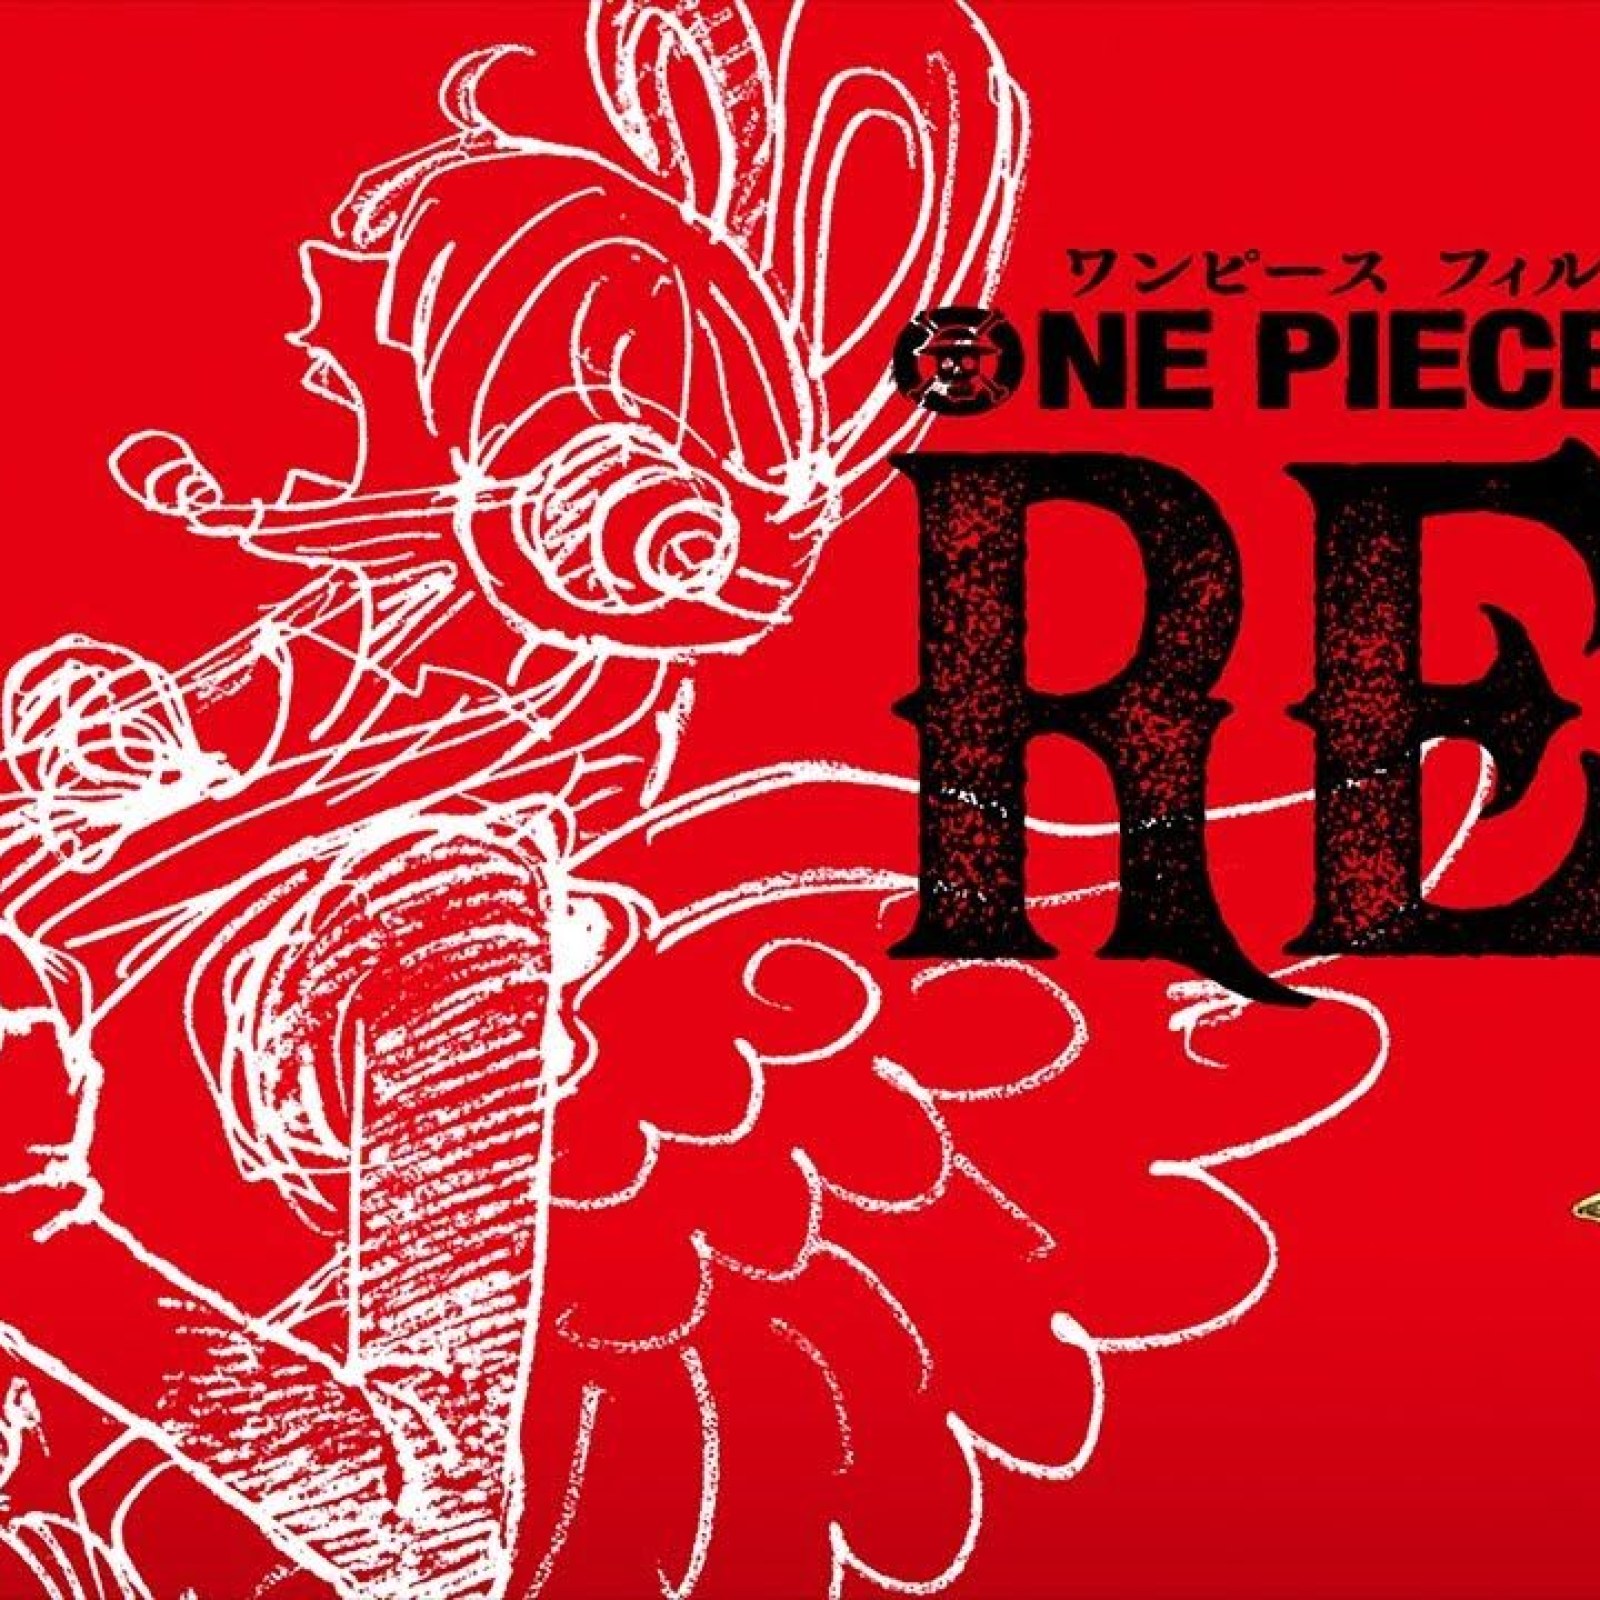 One Piece: Red' Drops Major Disappointing News For Fans Outside